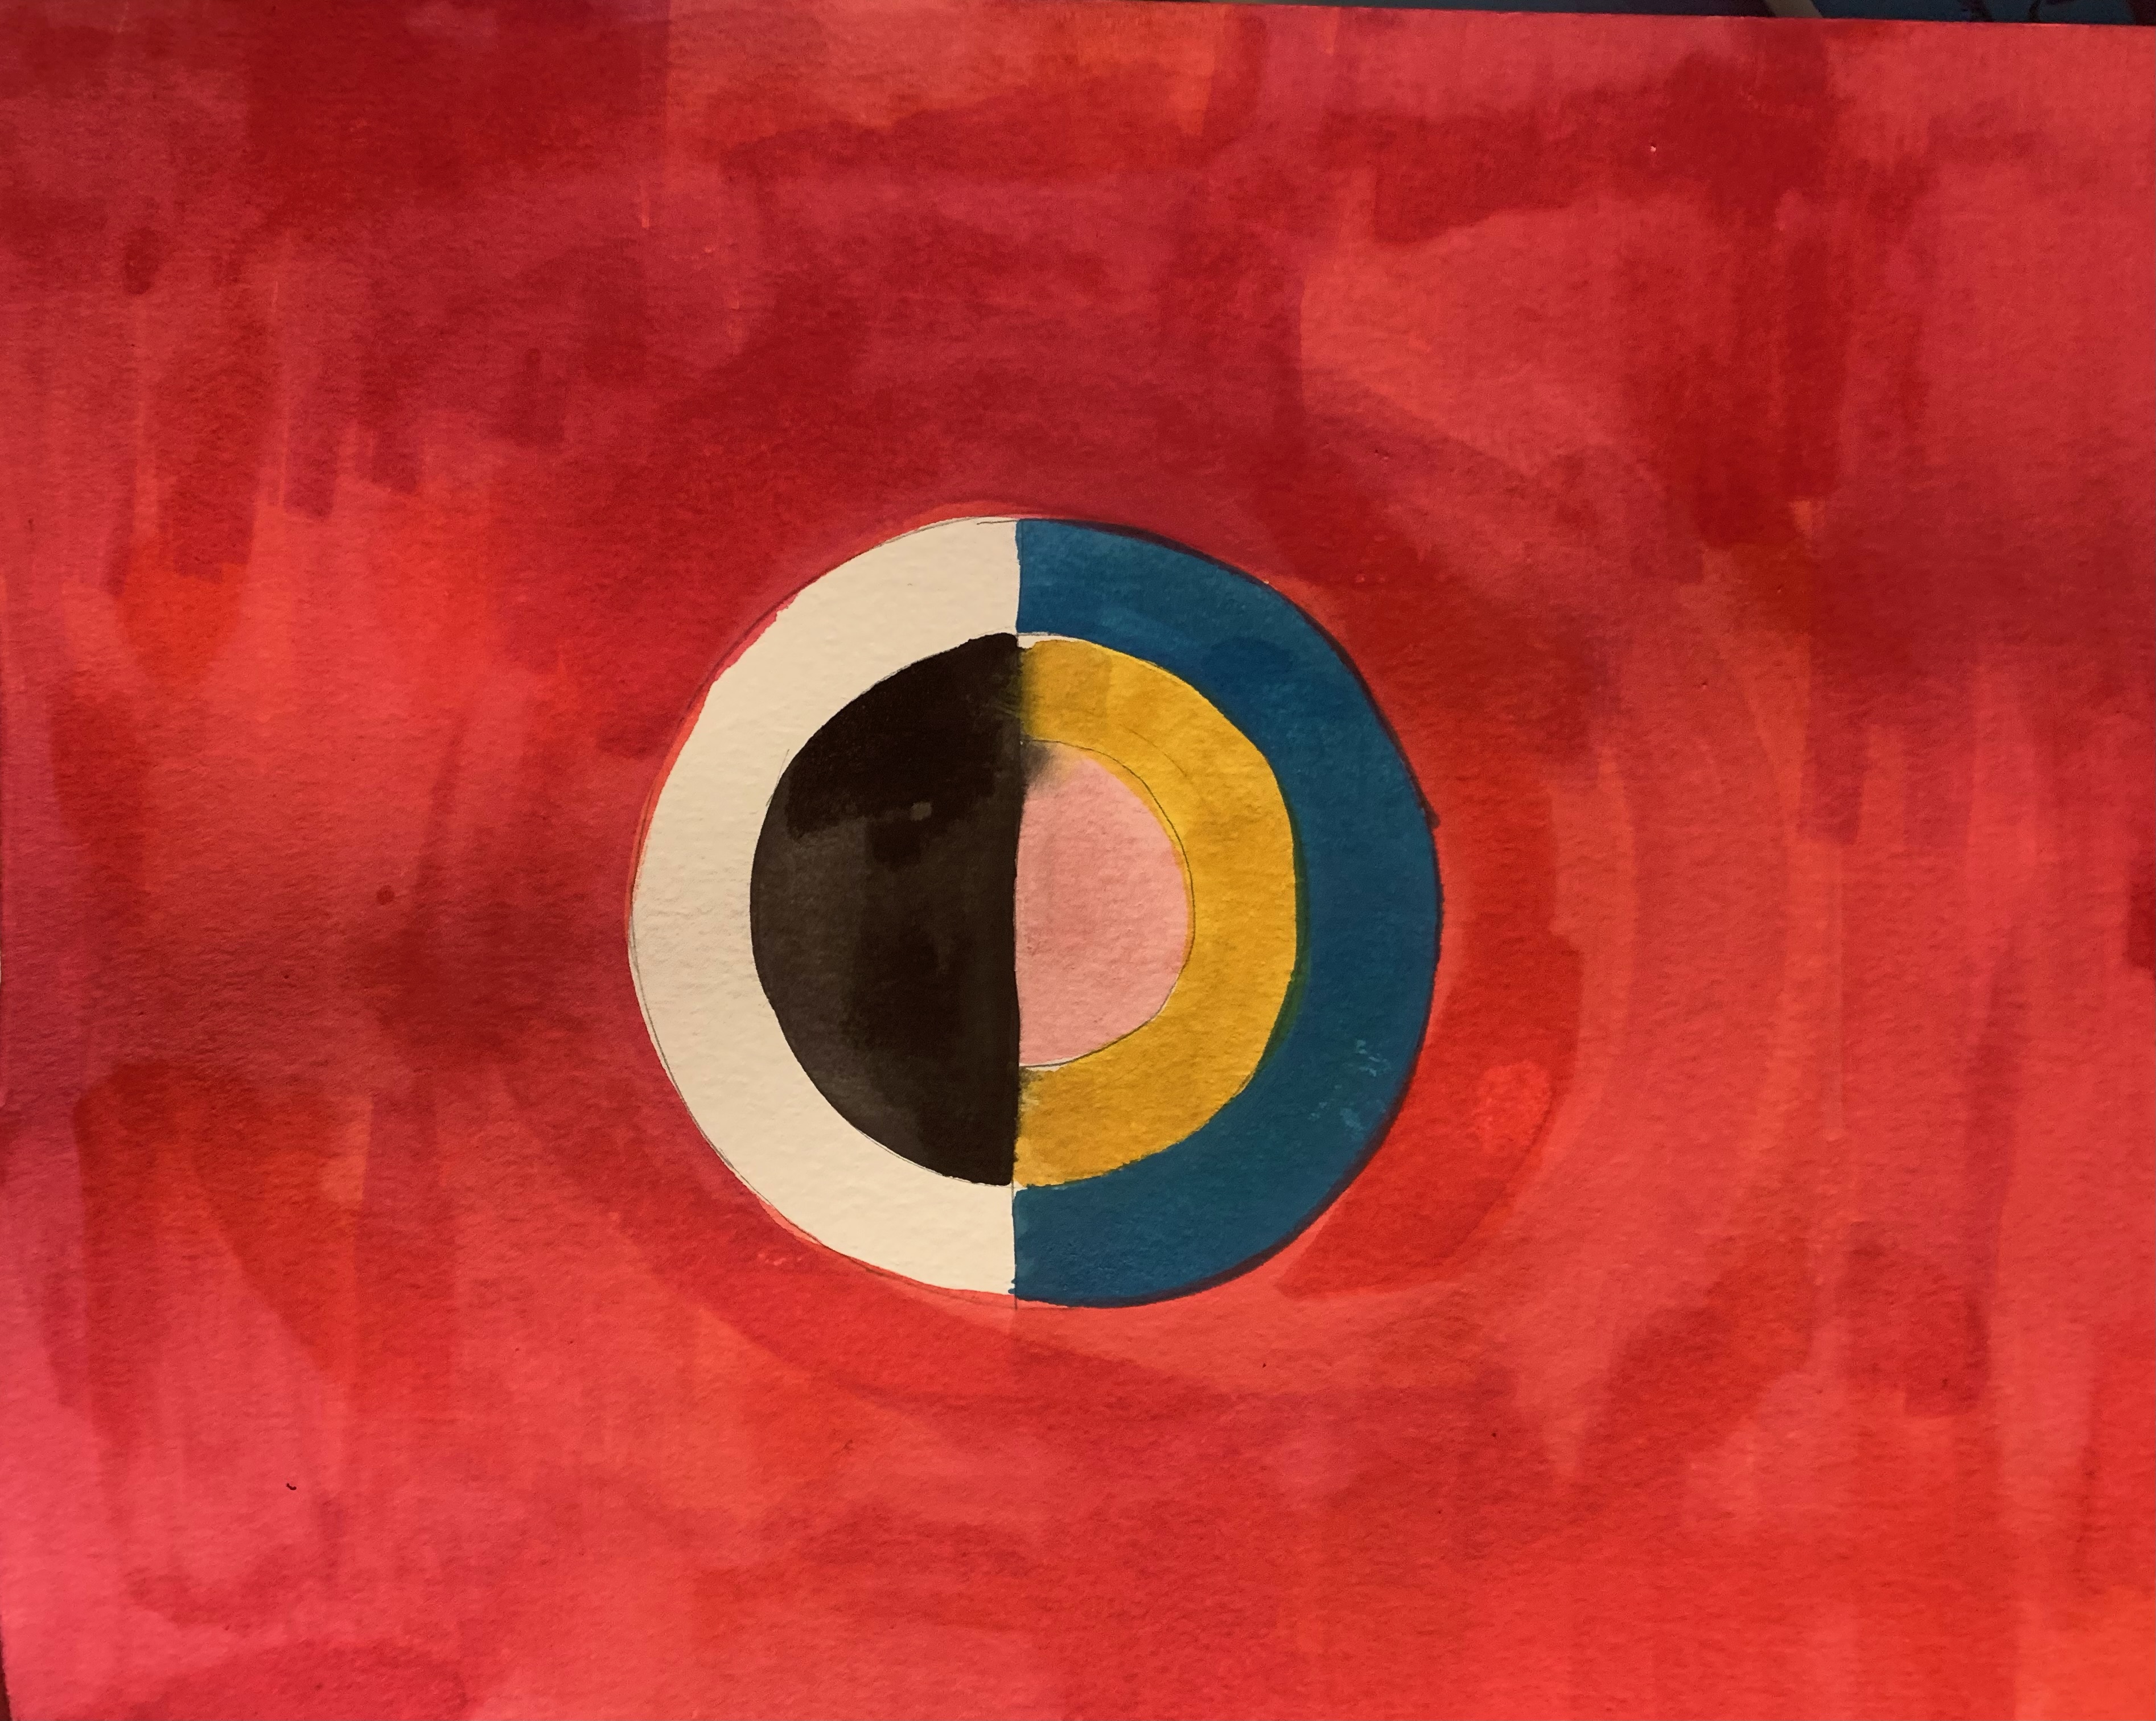 Image of a painting by Hilda Aaf Klint